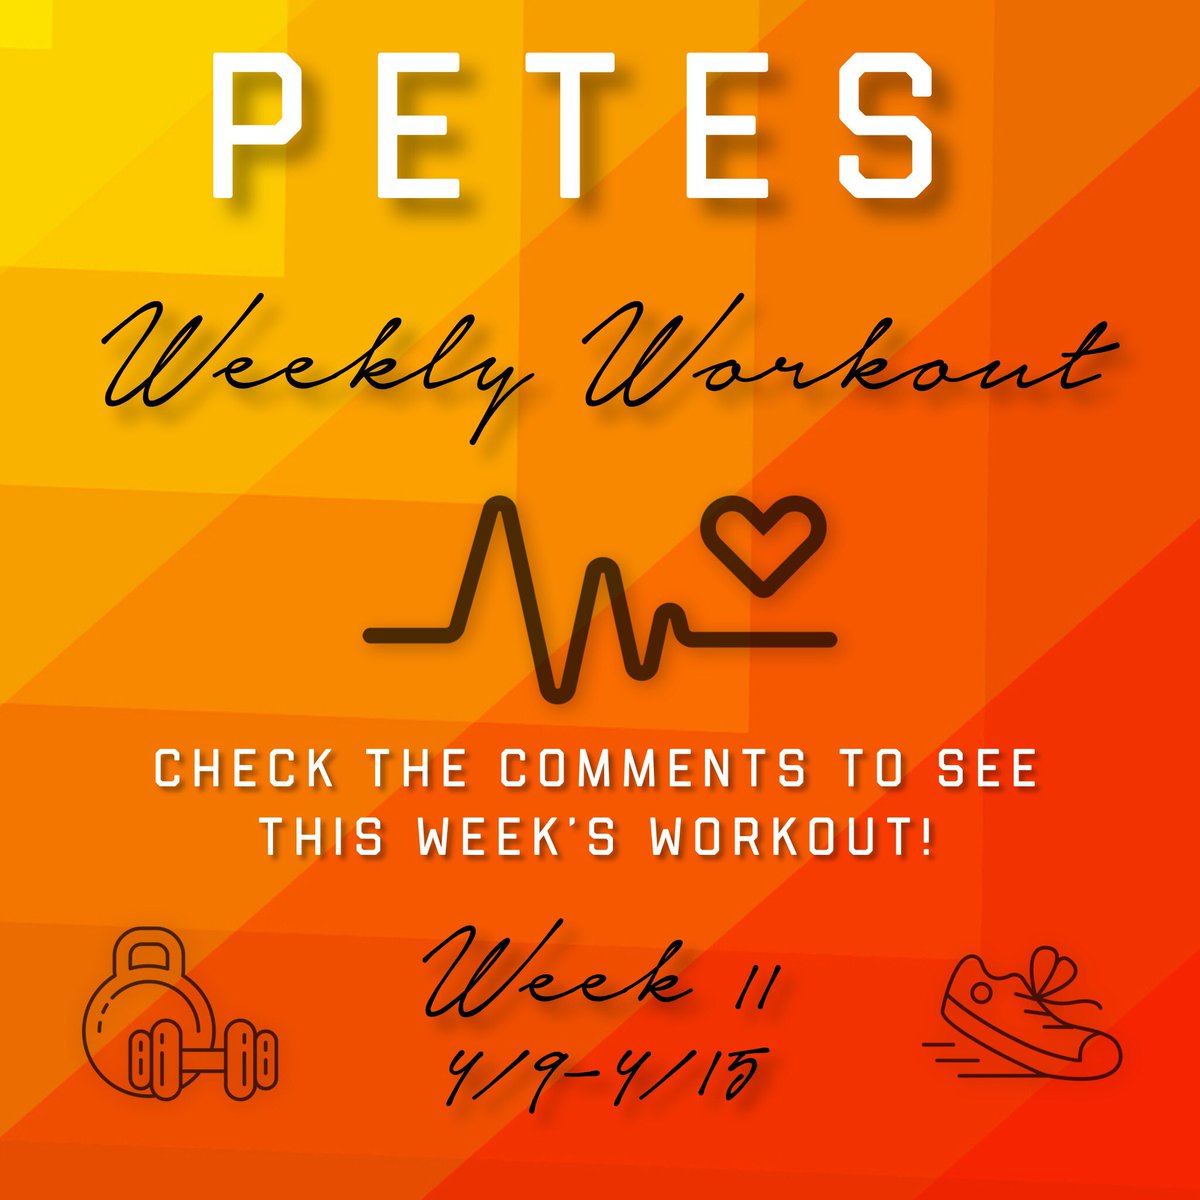 Make sure you check out our Instagram page the weekly workout to do during this beautiful weekend!